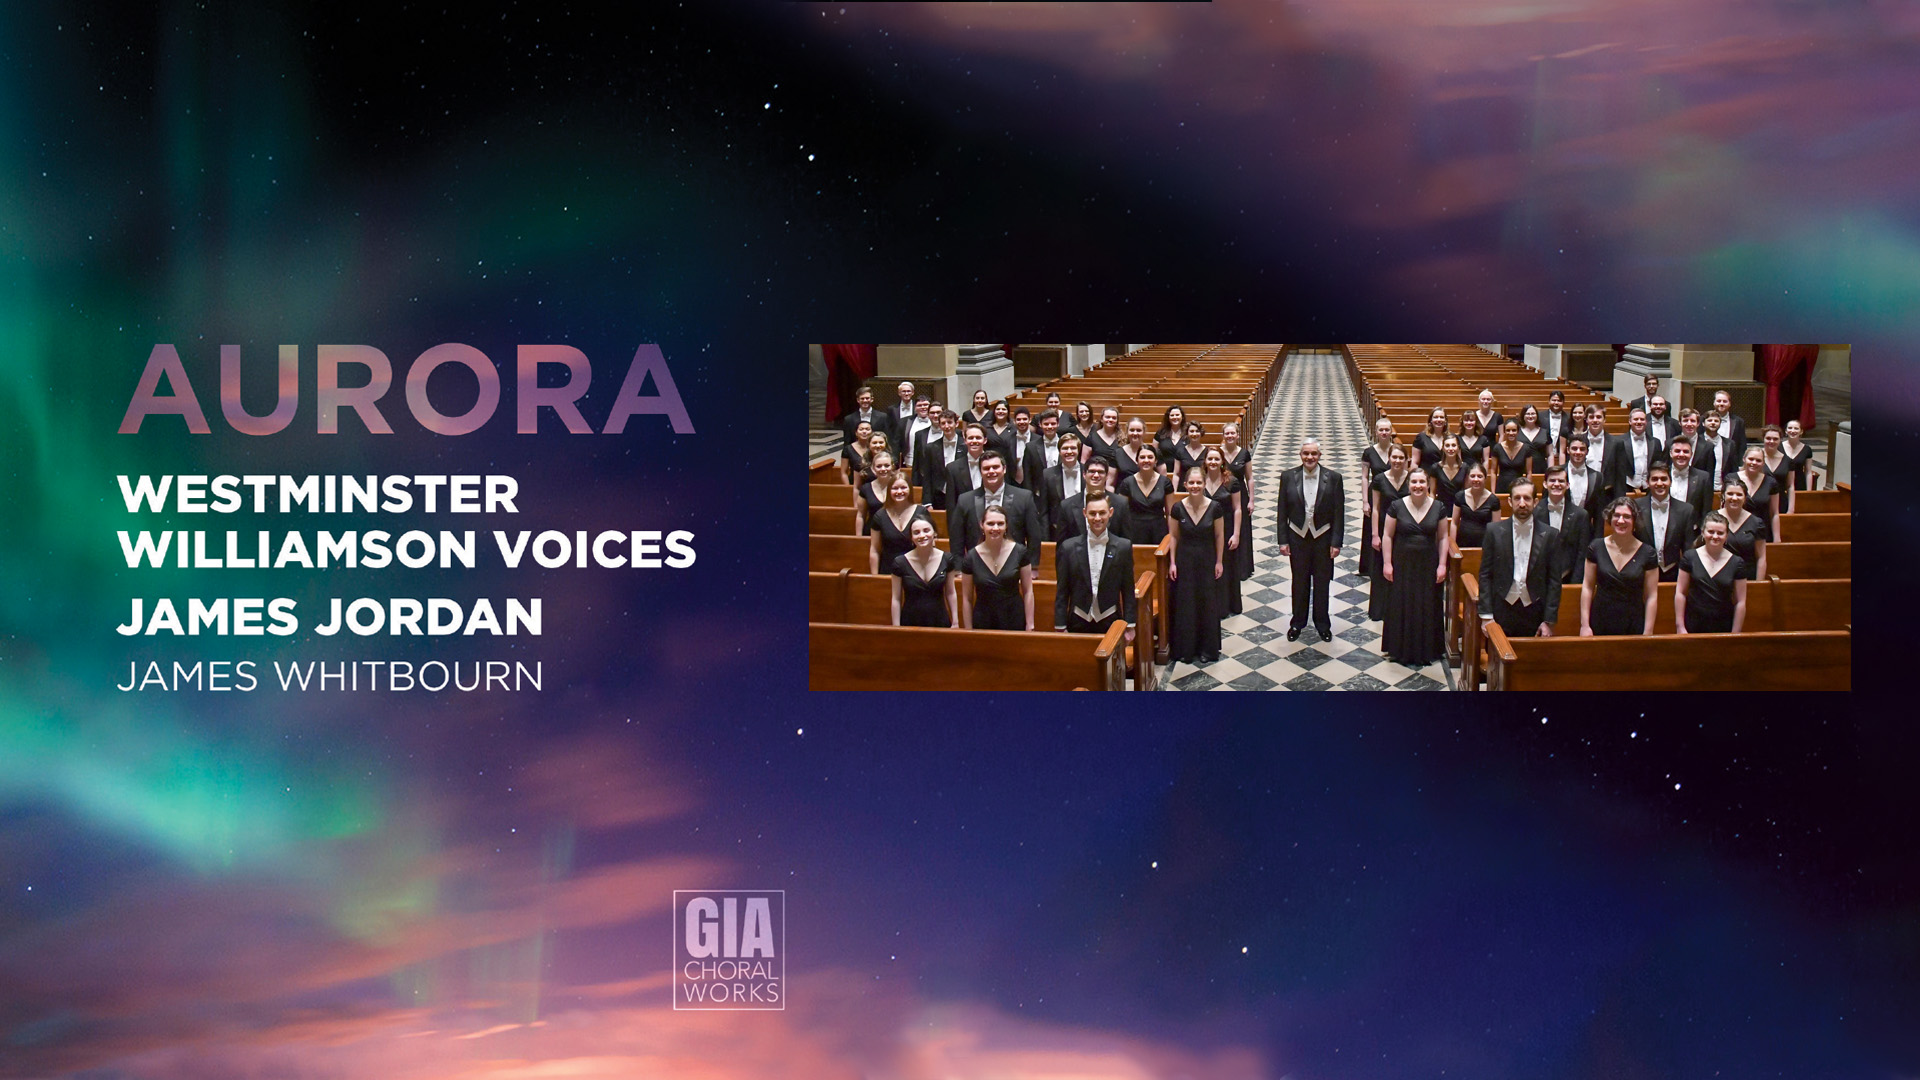 Aurora recording from Westminster Williamson Voices